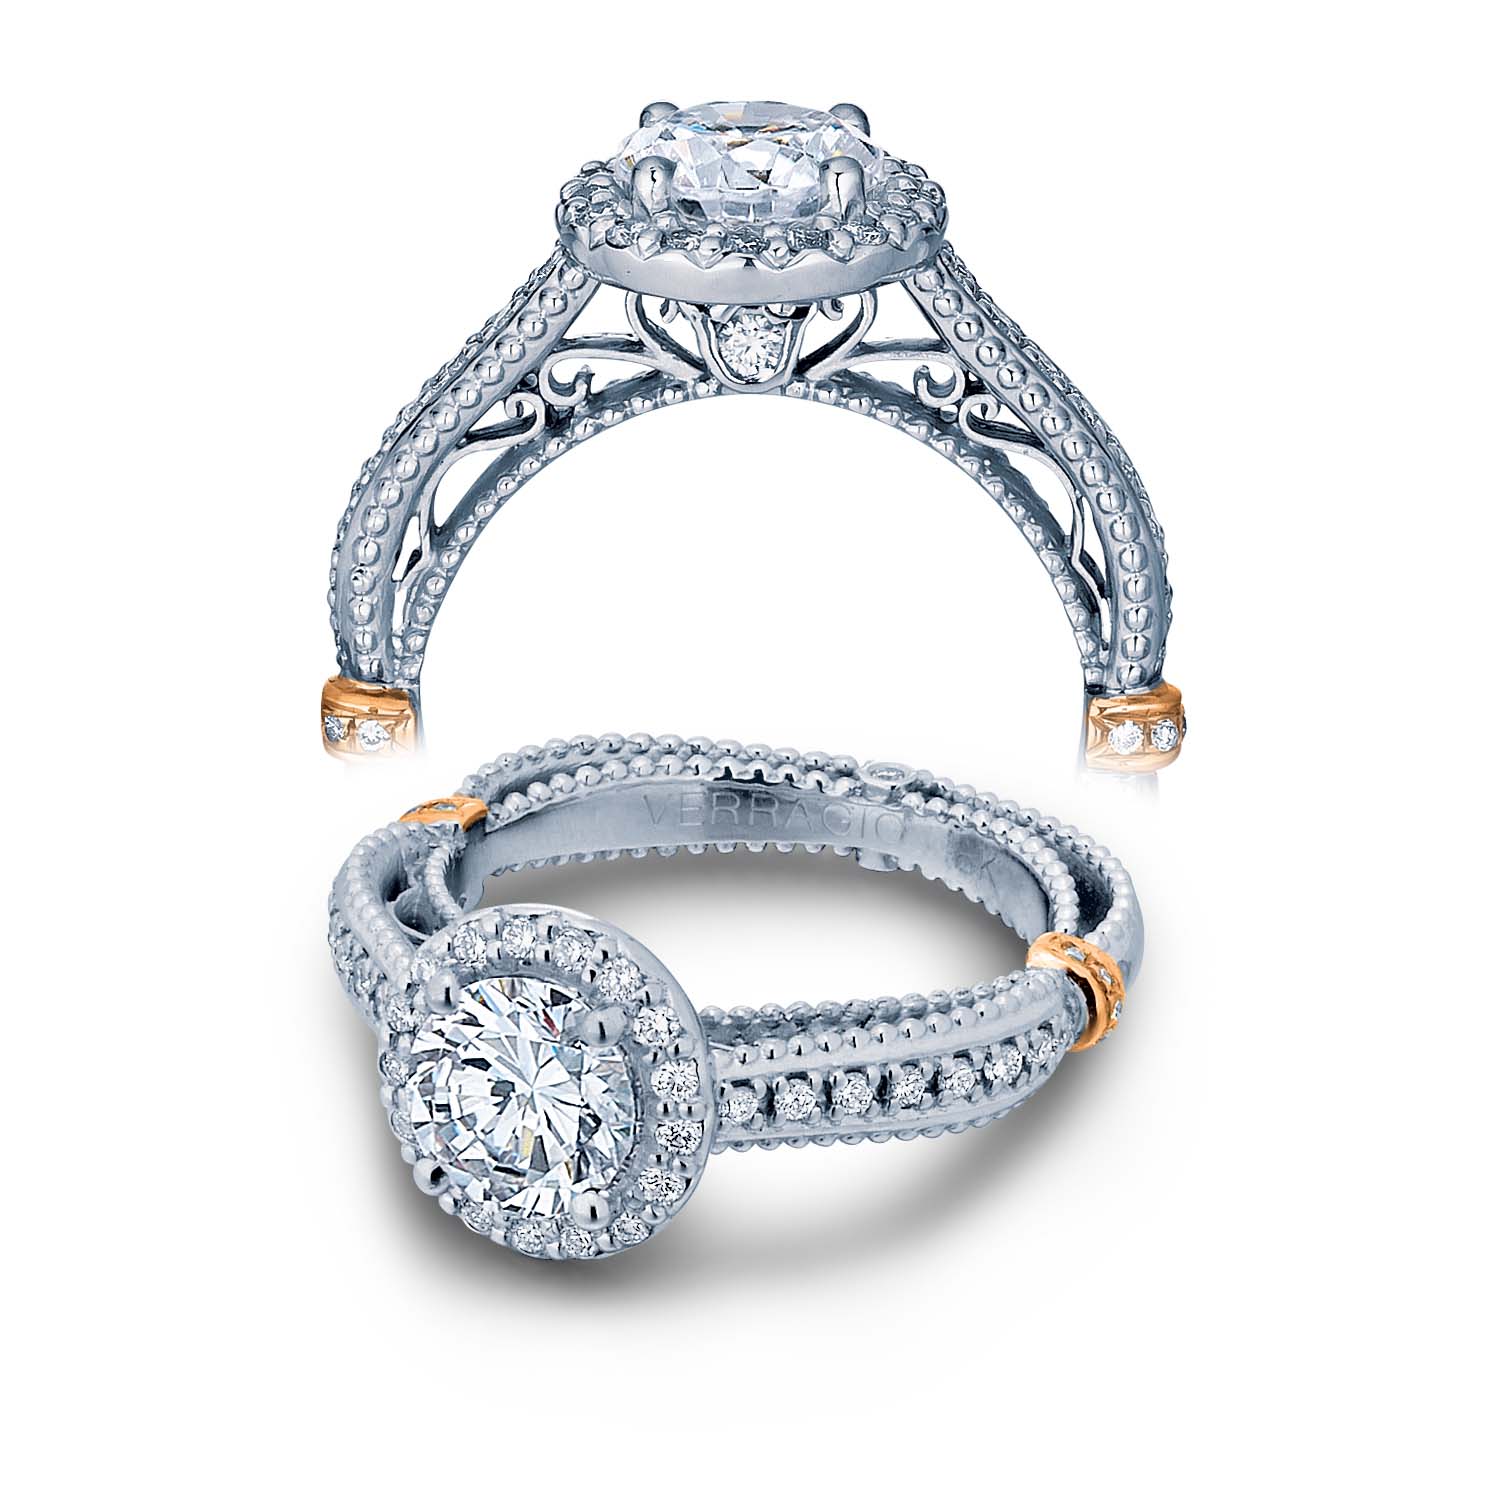 Verragio Venetian Collection of Engagement Rings and WEdding bands